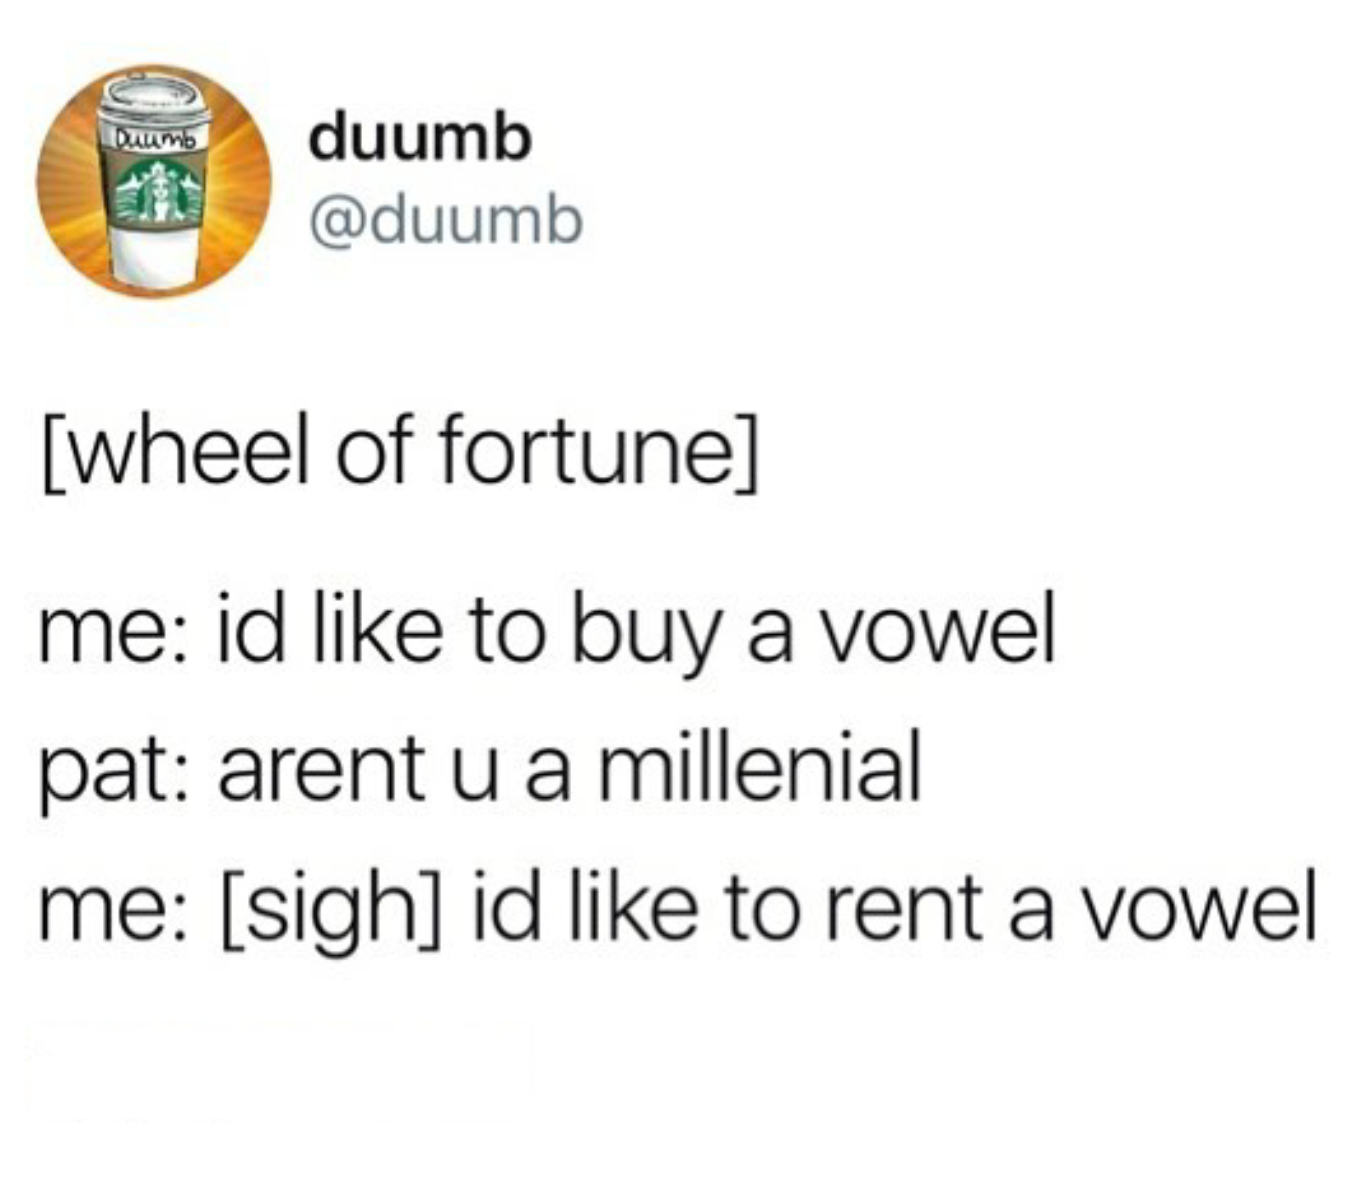 material - Duumo duumb wheel of fortune me id to buy a vowel pat arent u a millenial me sigh id to rent a vowel